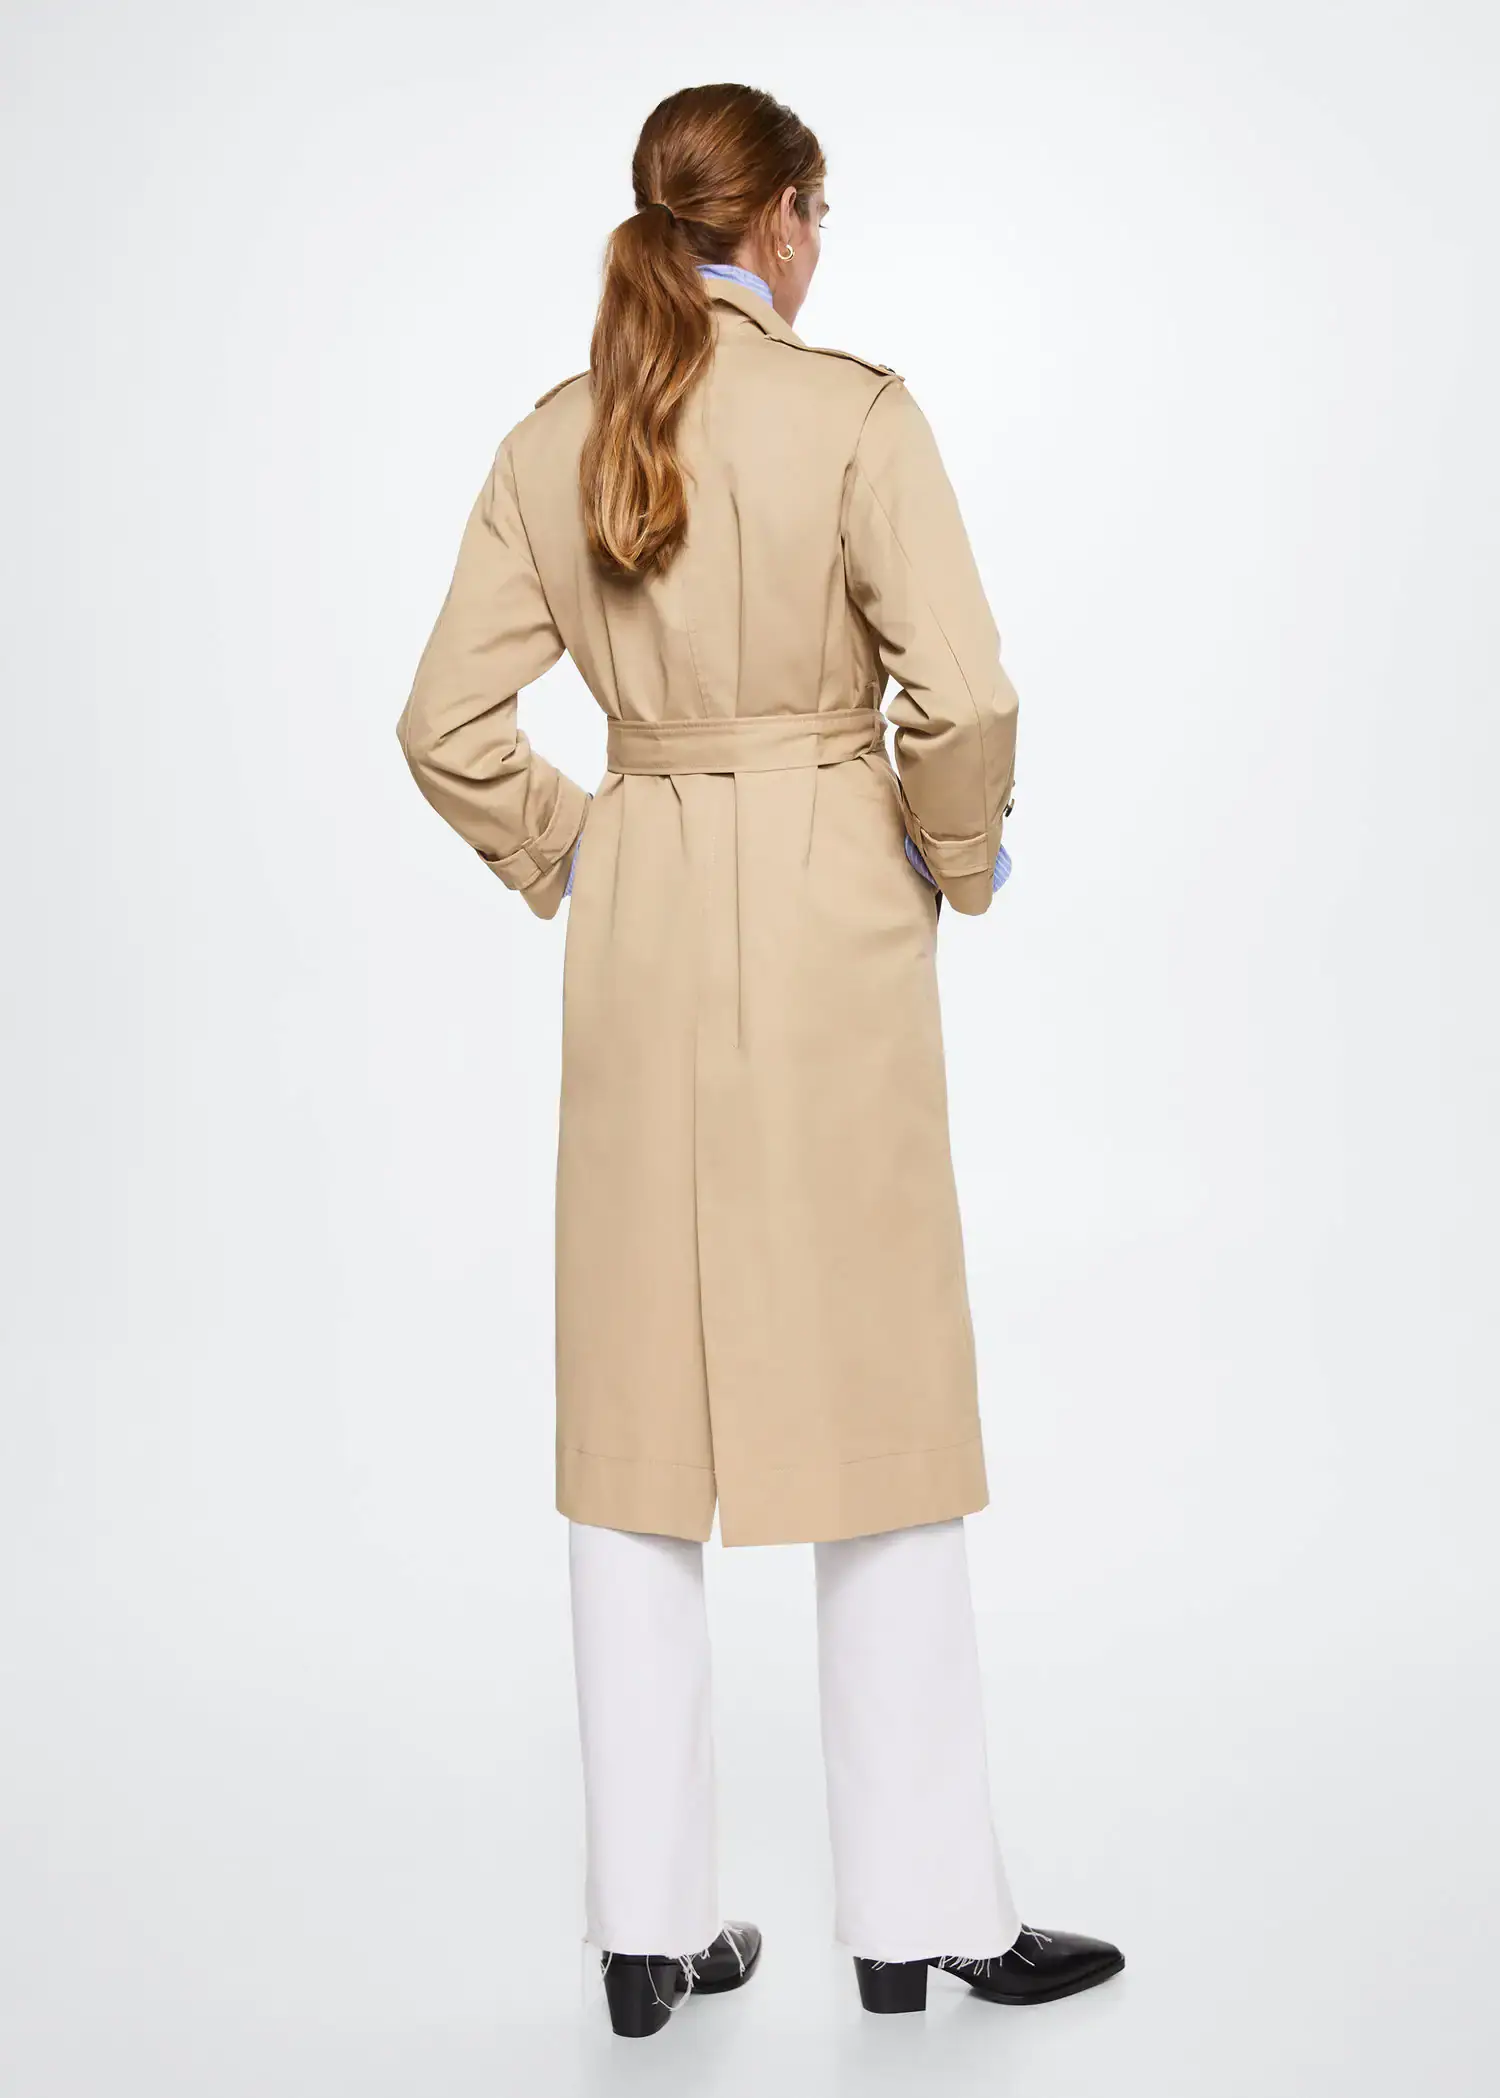 Mango Cotton classic trench coat. a woman wearing a tan trench coat and white pants. 